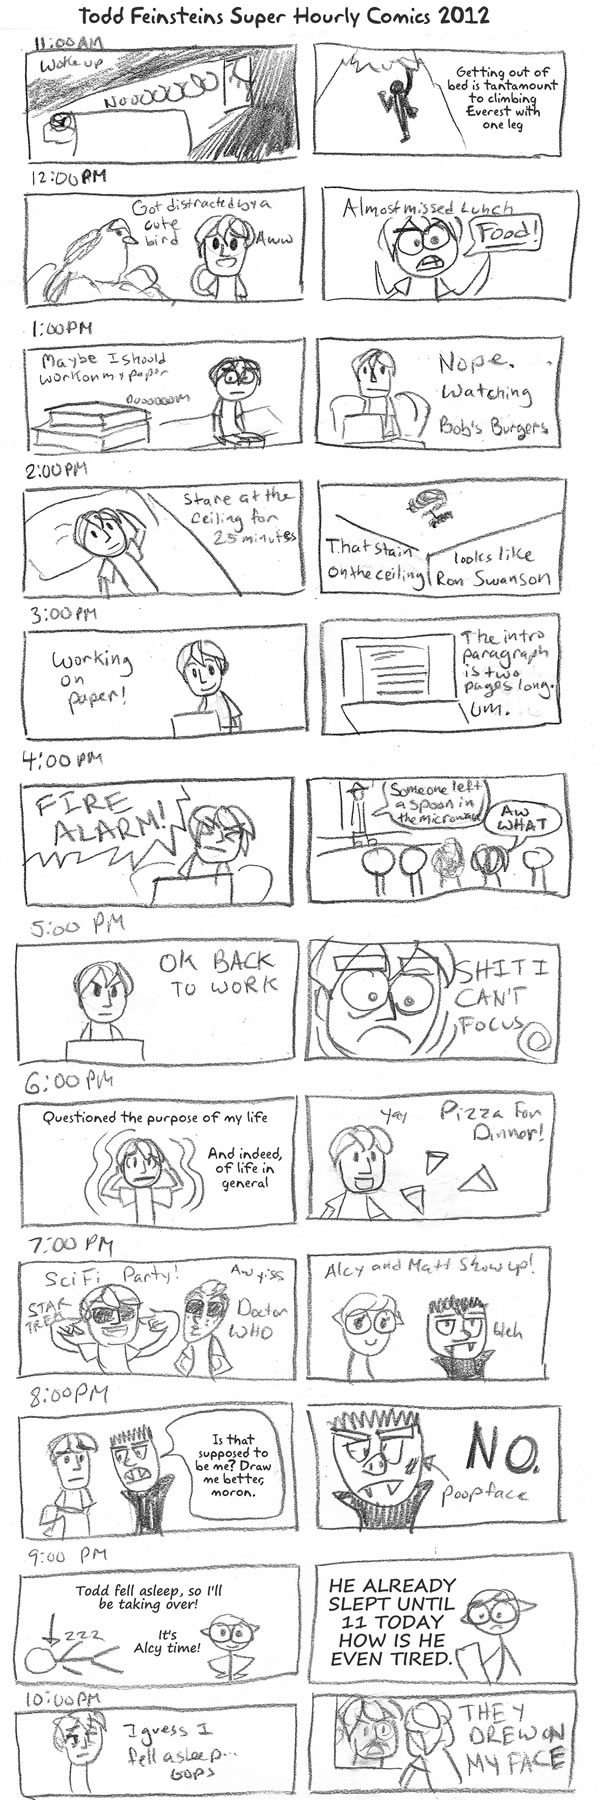 Todd Feinsteins Totally Excellent Hourly Comics 2012 Great Job